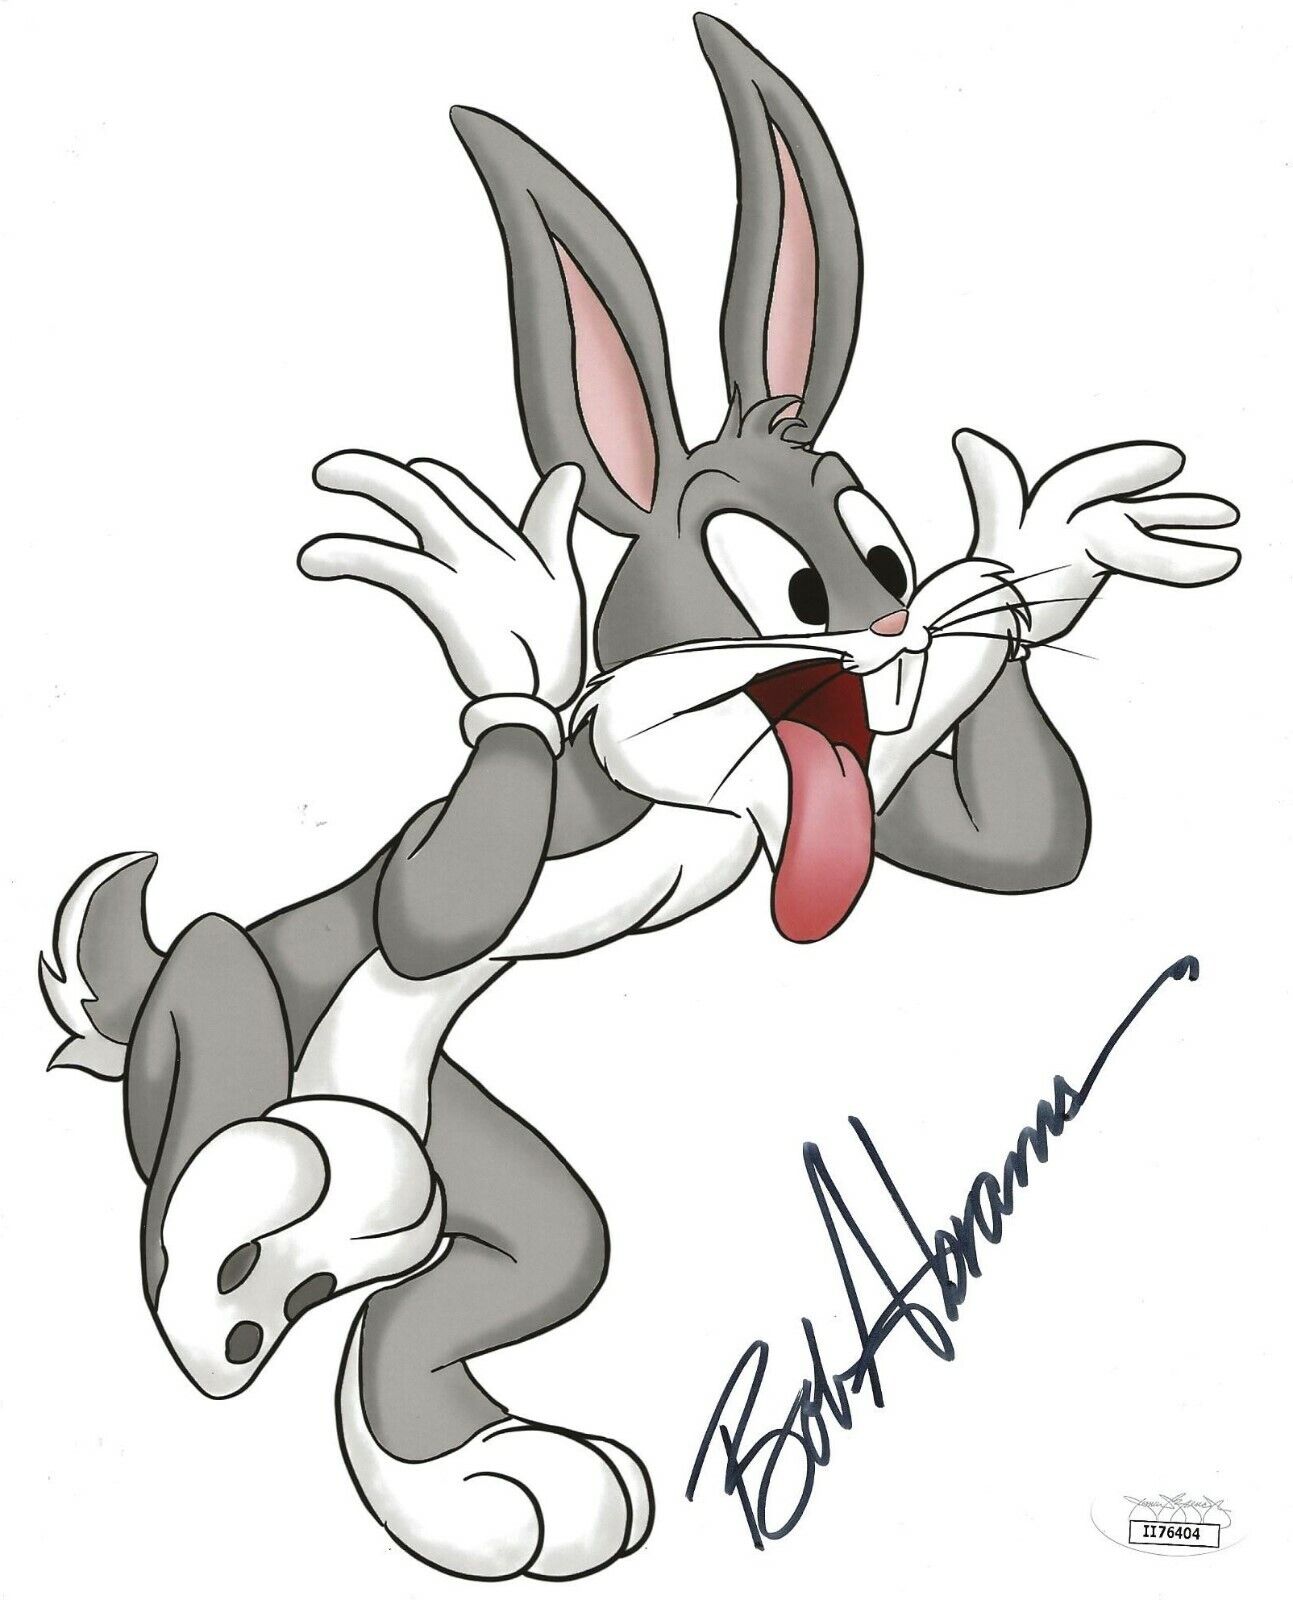 Bob Abrams Cartoonist signed Bugs Bunny 8x10 Photo Poster painting autographed JSA